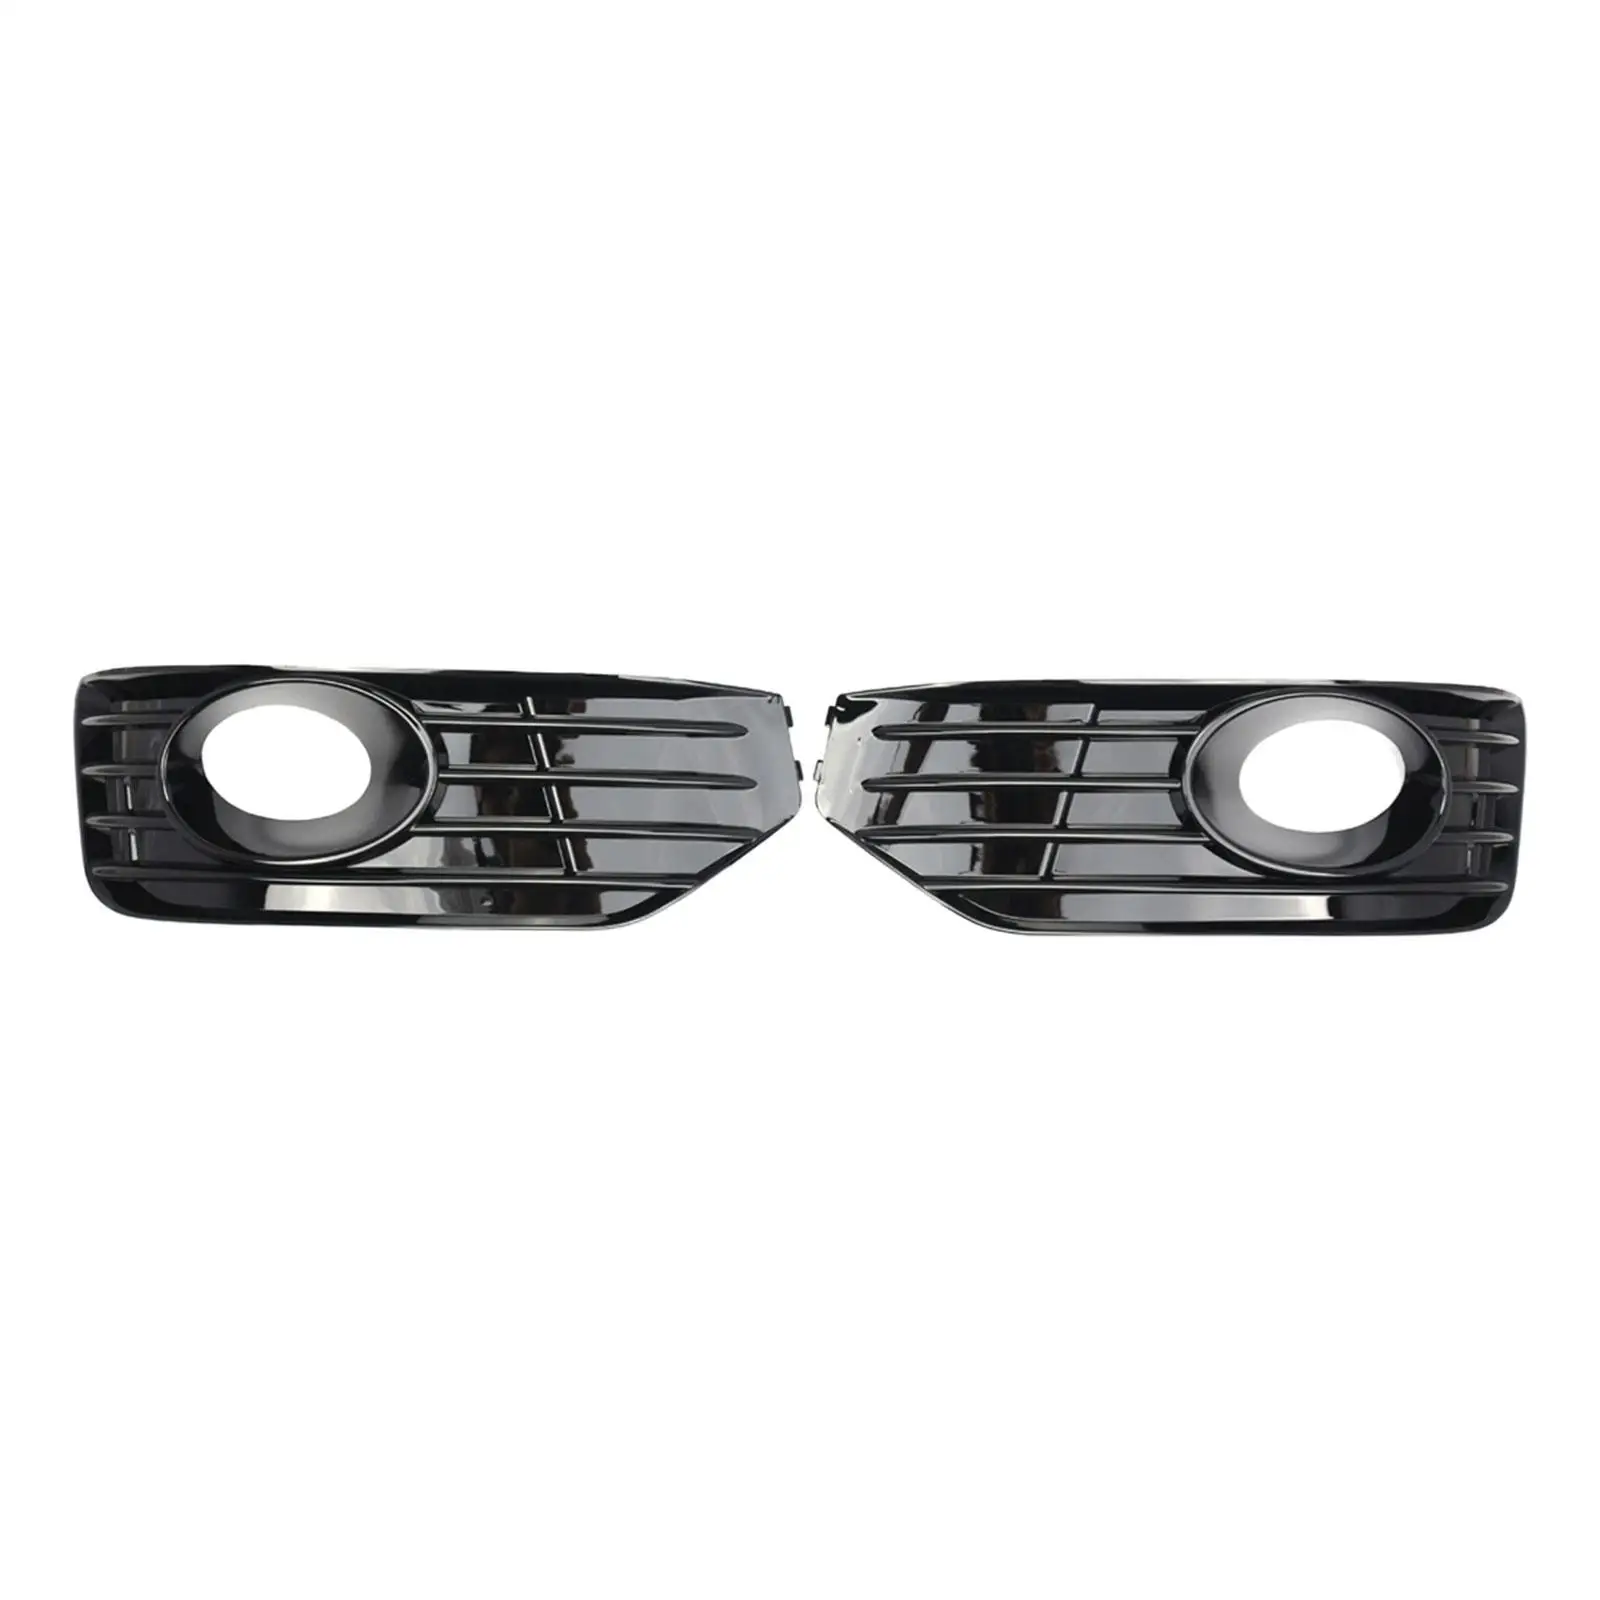 2x Fog Light Cover Grilles Fog Lamps Grille Easy Installation Assembly